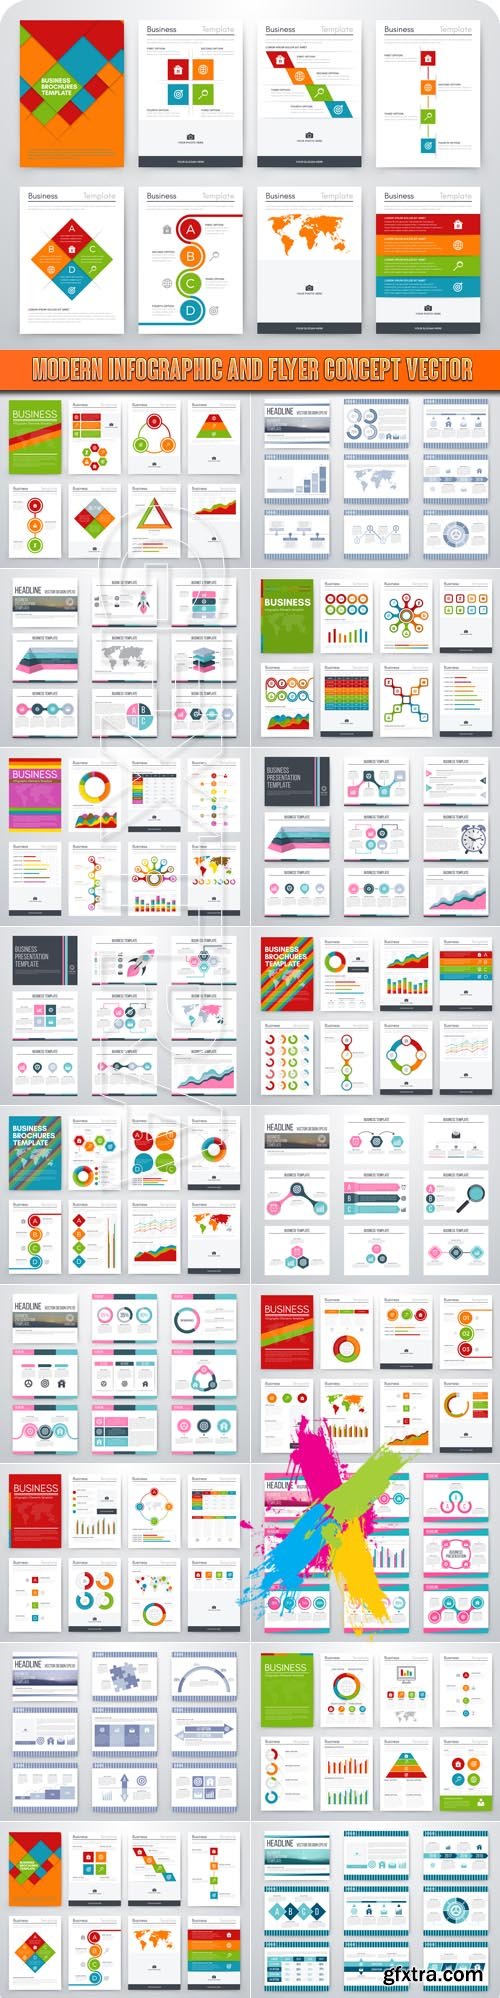 Modern infographic and flyer concept vector